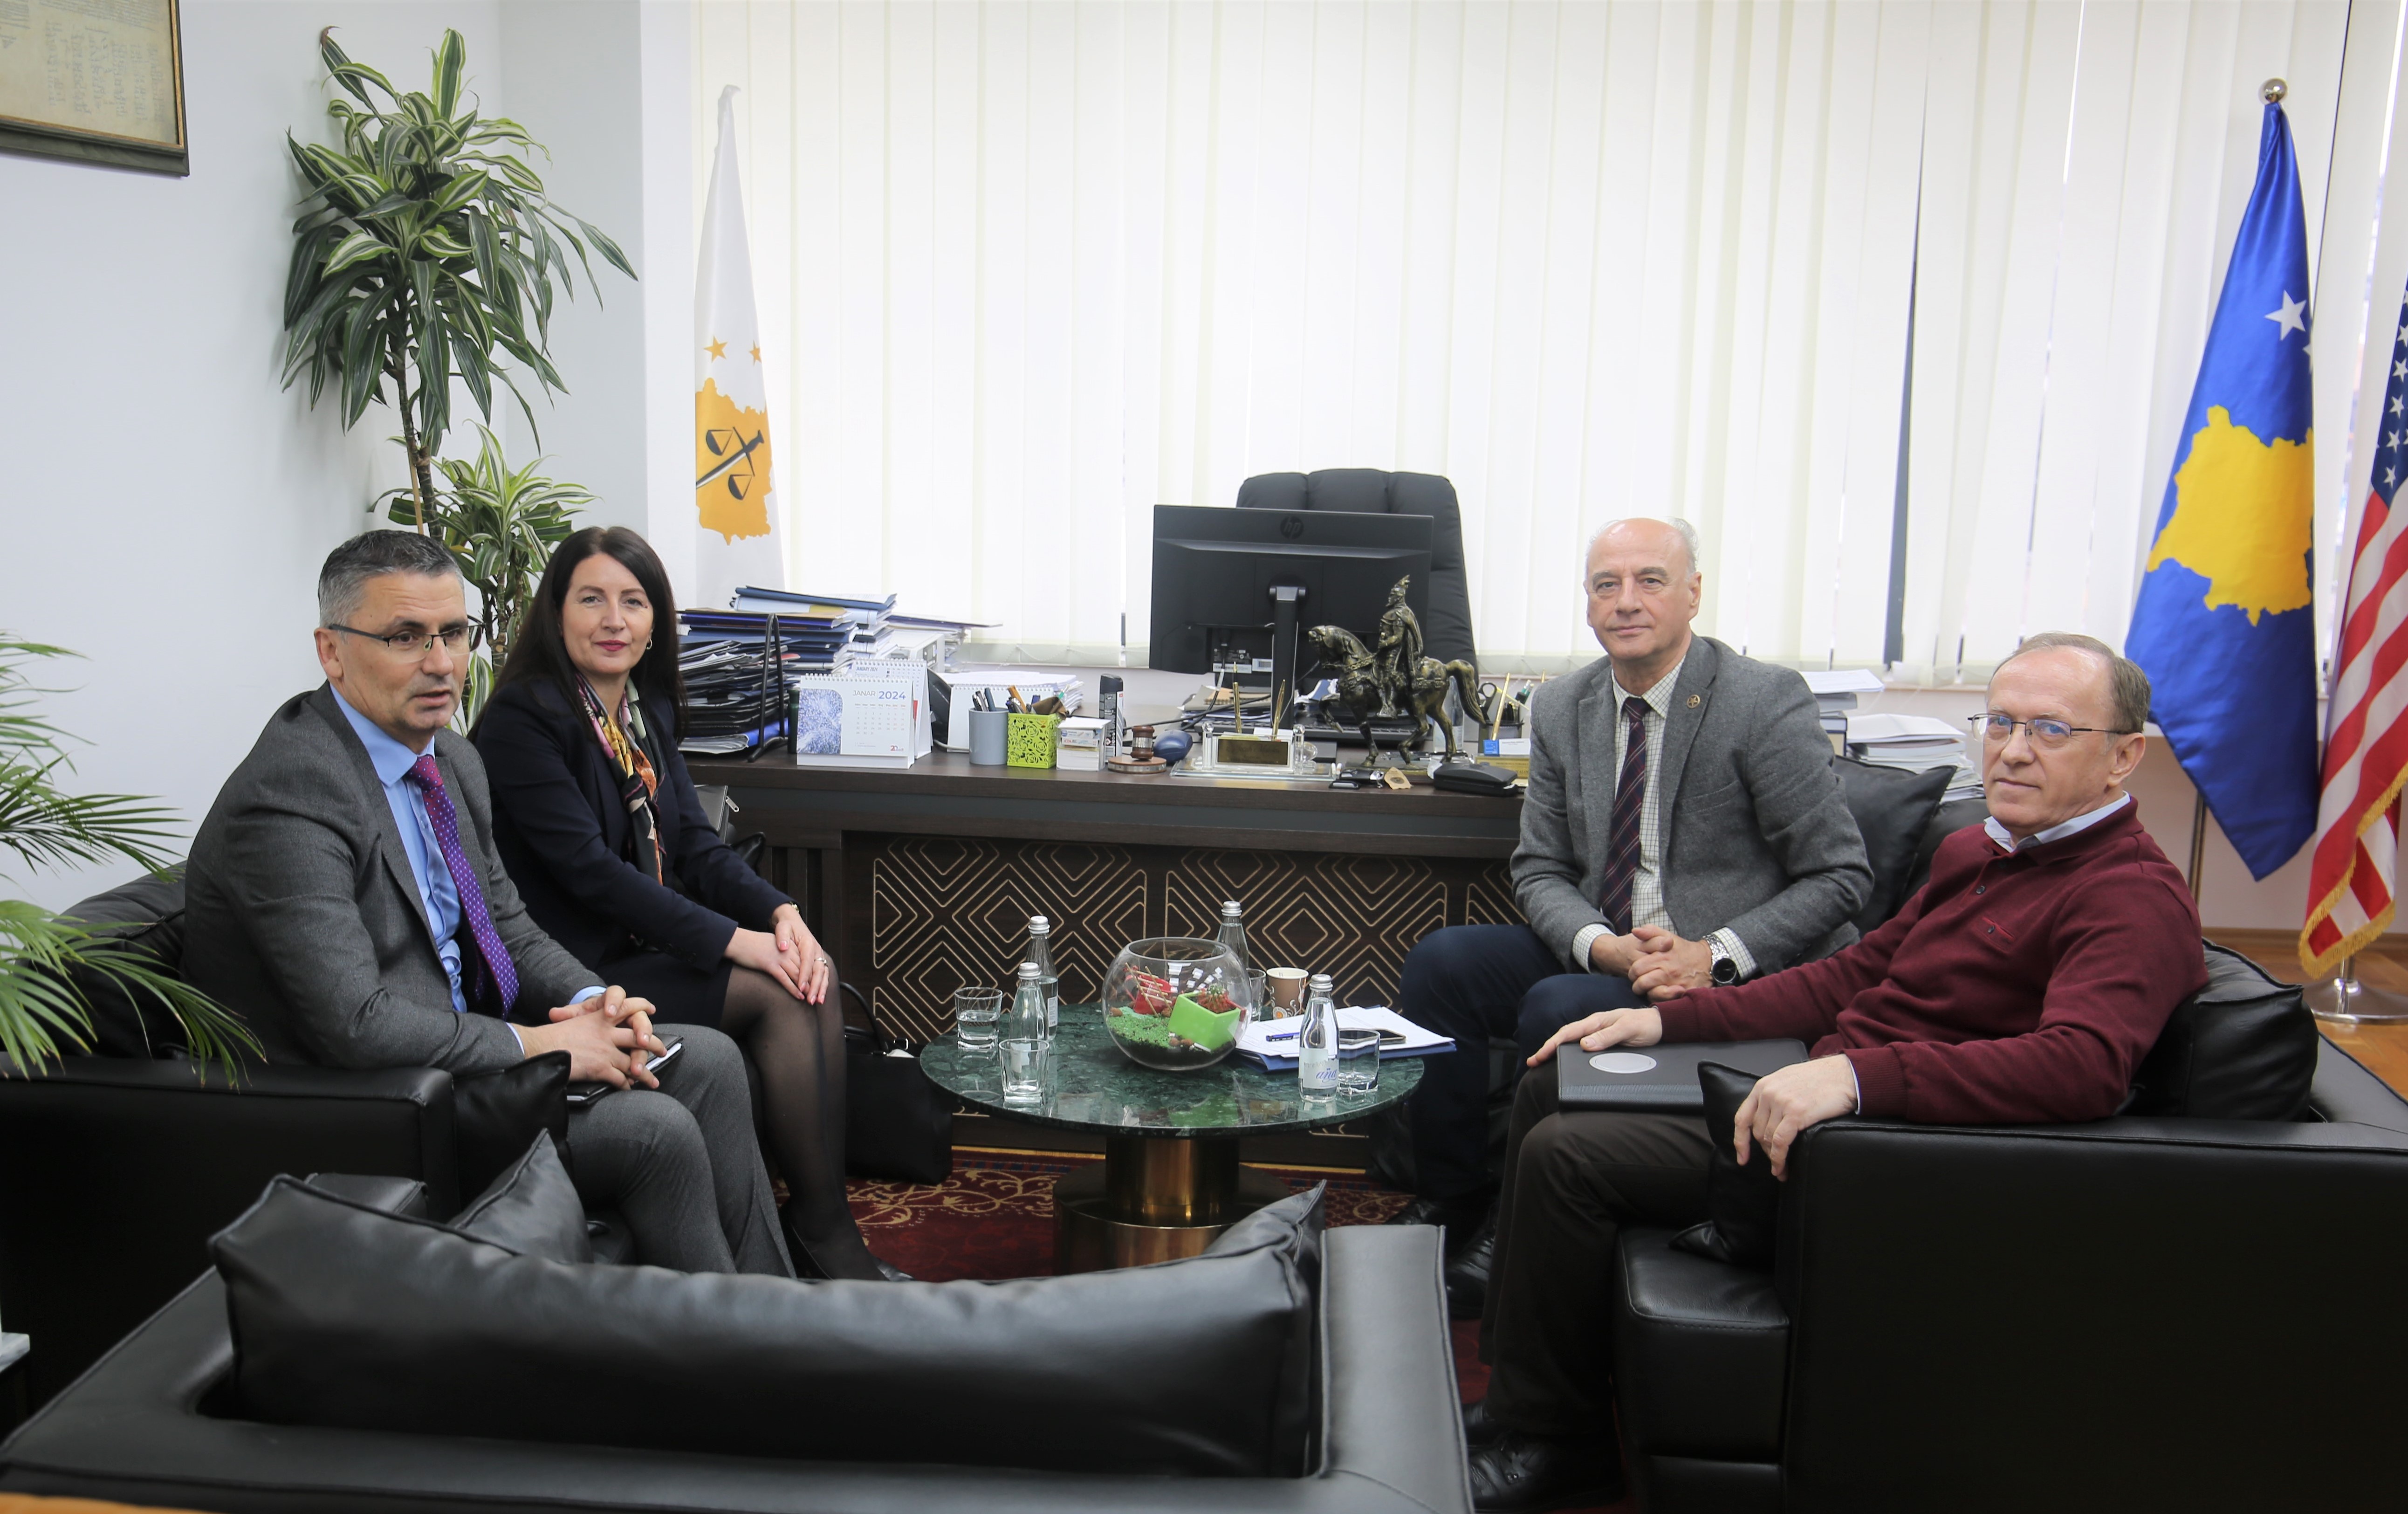 Chairman Maloku hosted the Auditor General, Vlora Spanca